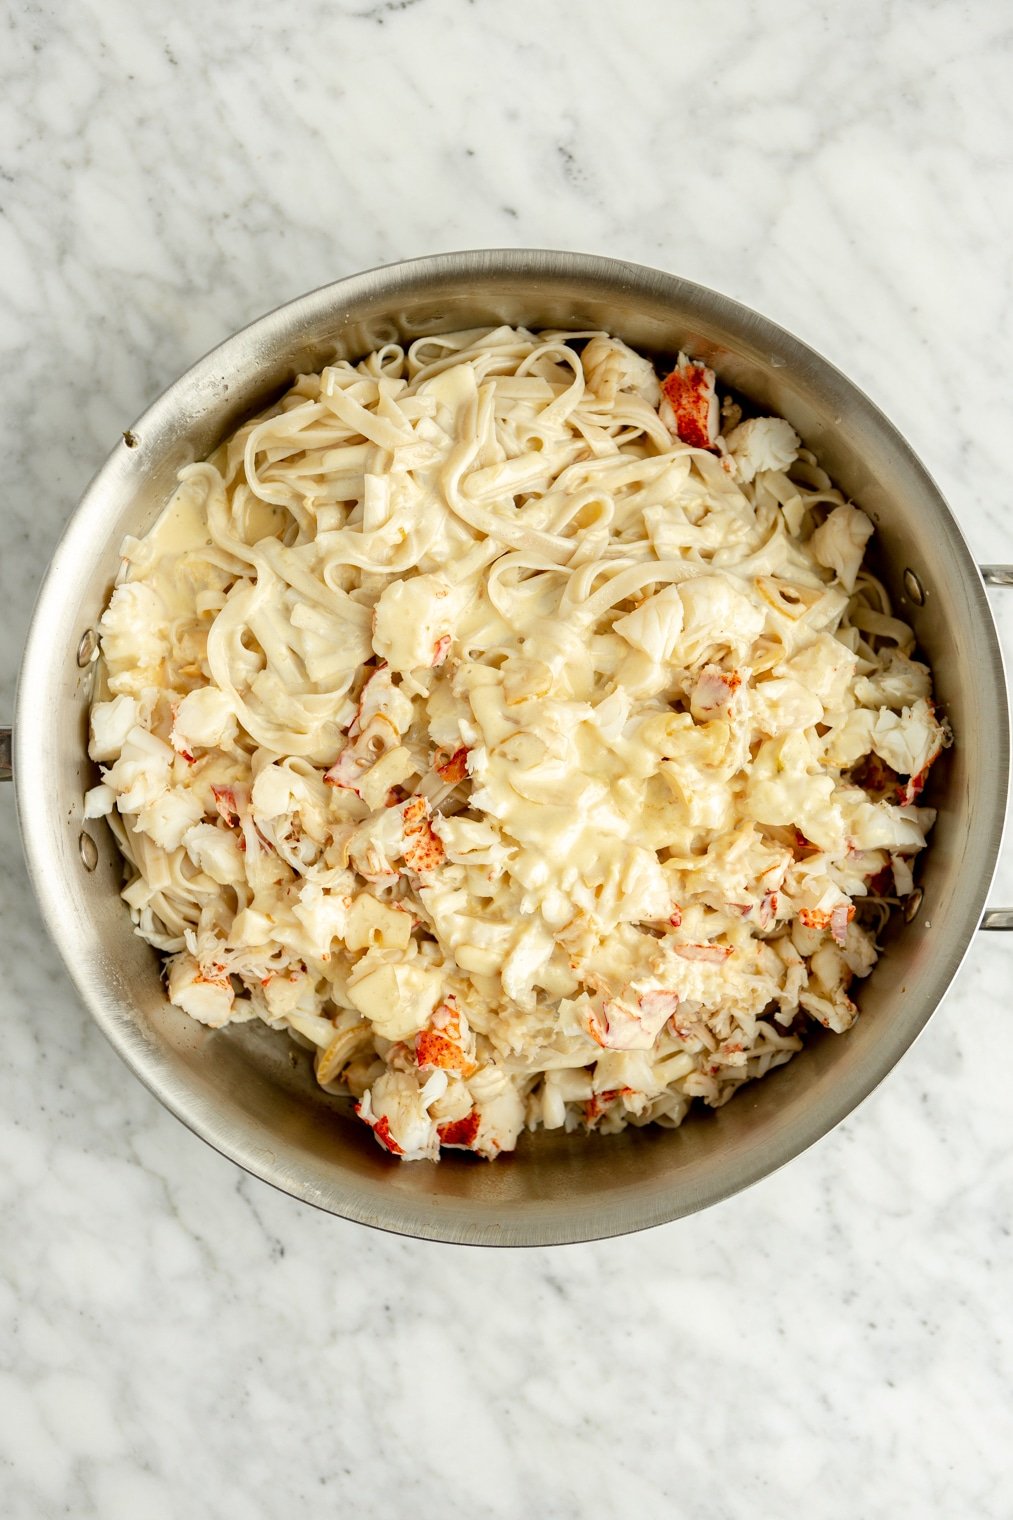 Fettuccine noodles, alfredo sauce, and chopped lobster in a large pan.